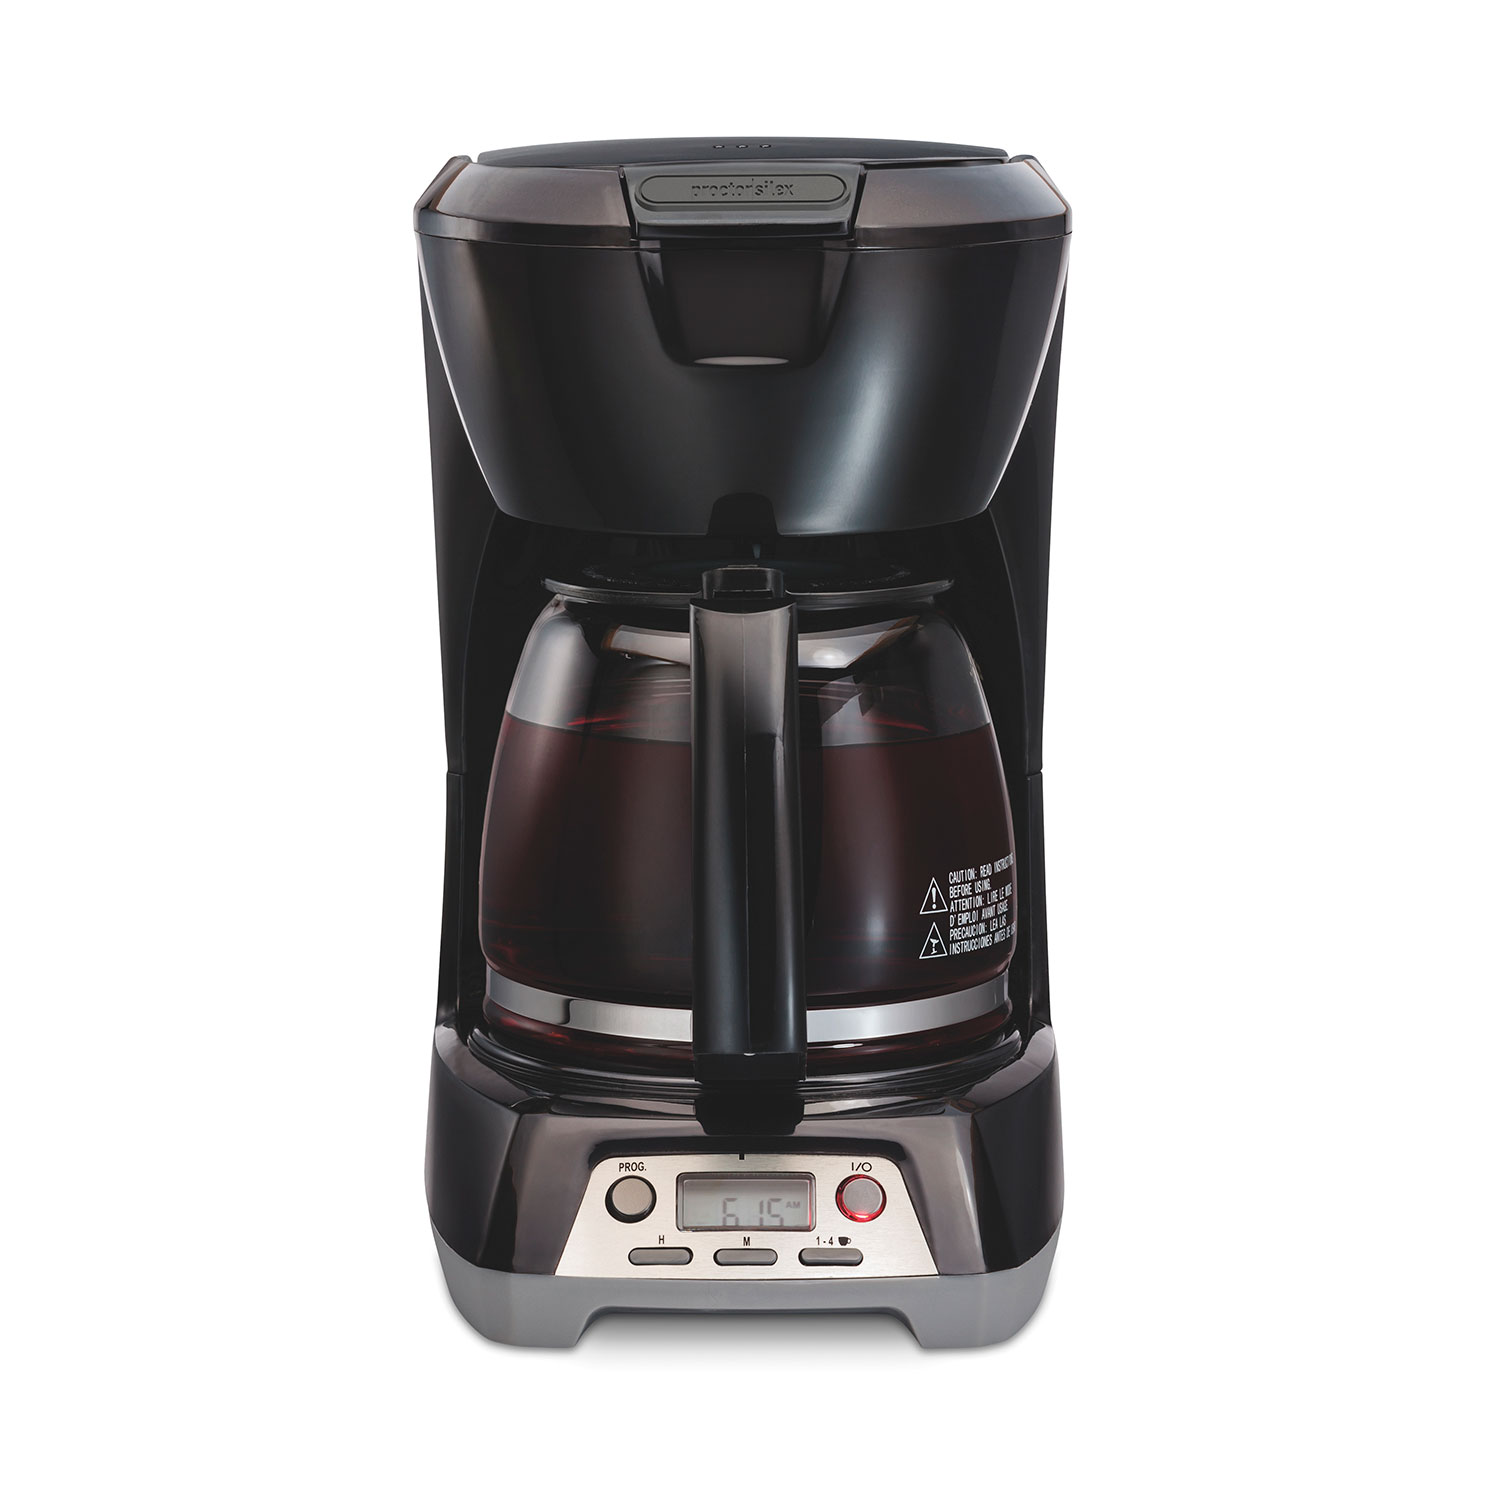 Proctor Silex 43687 FrontFill Programmable 12 Cup Coffee Maker, Black